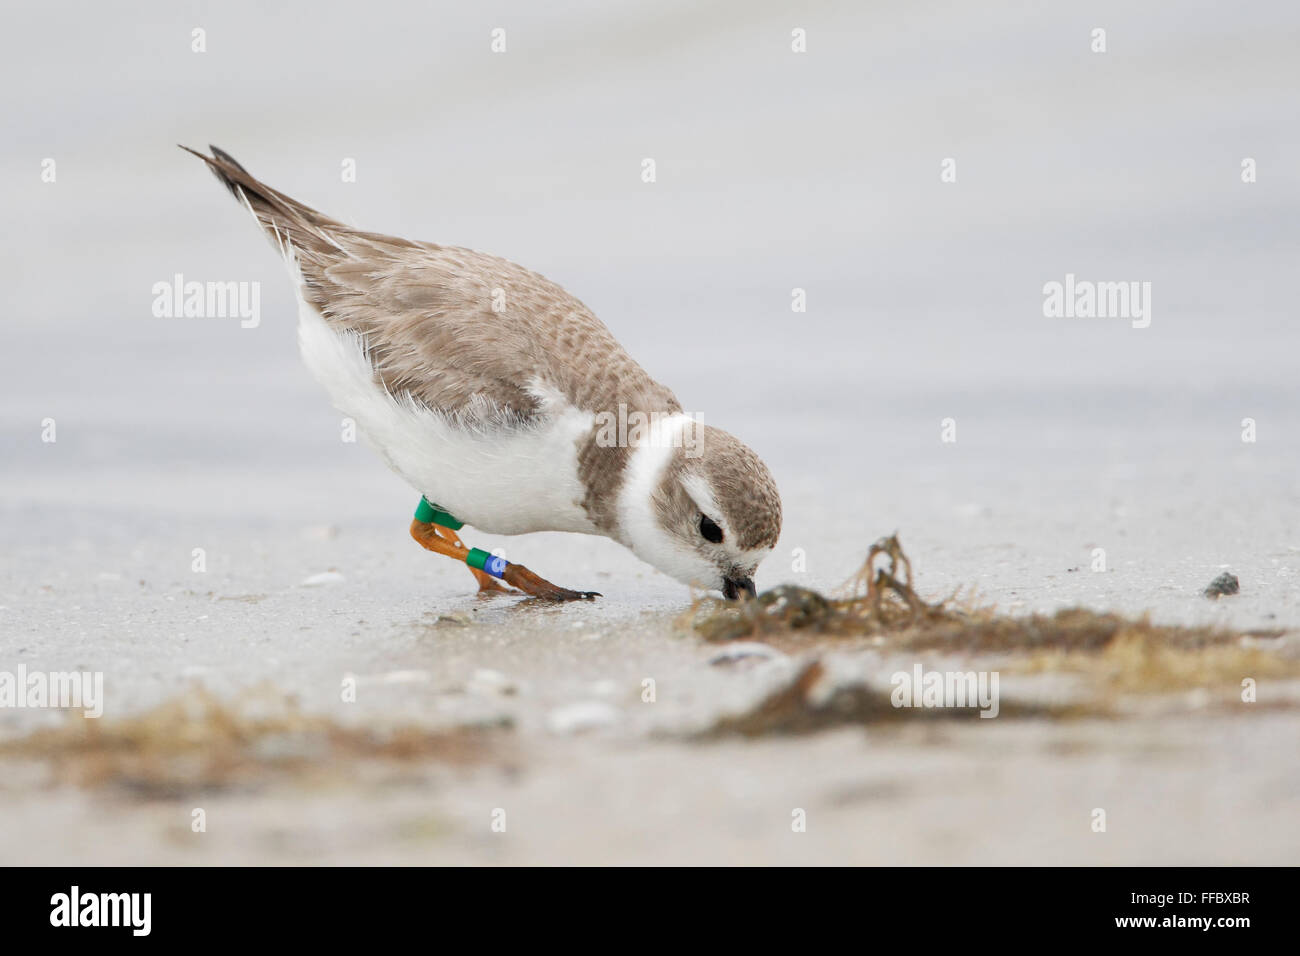 Piping Plover (Charadrius melodus) on beach at Fort De Soto Park, Tierra Verde, Florida, USA. Stock Photo